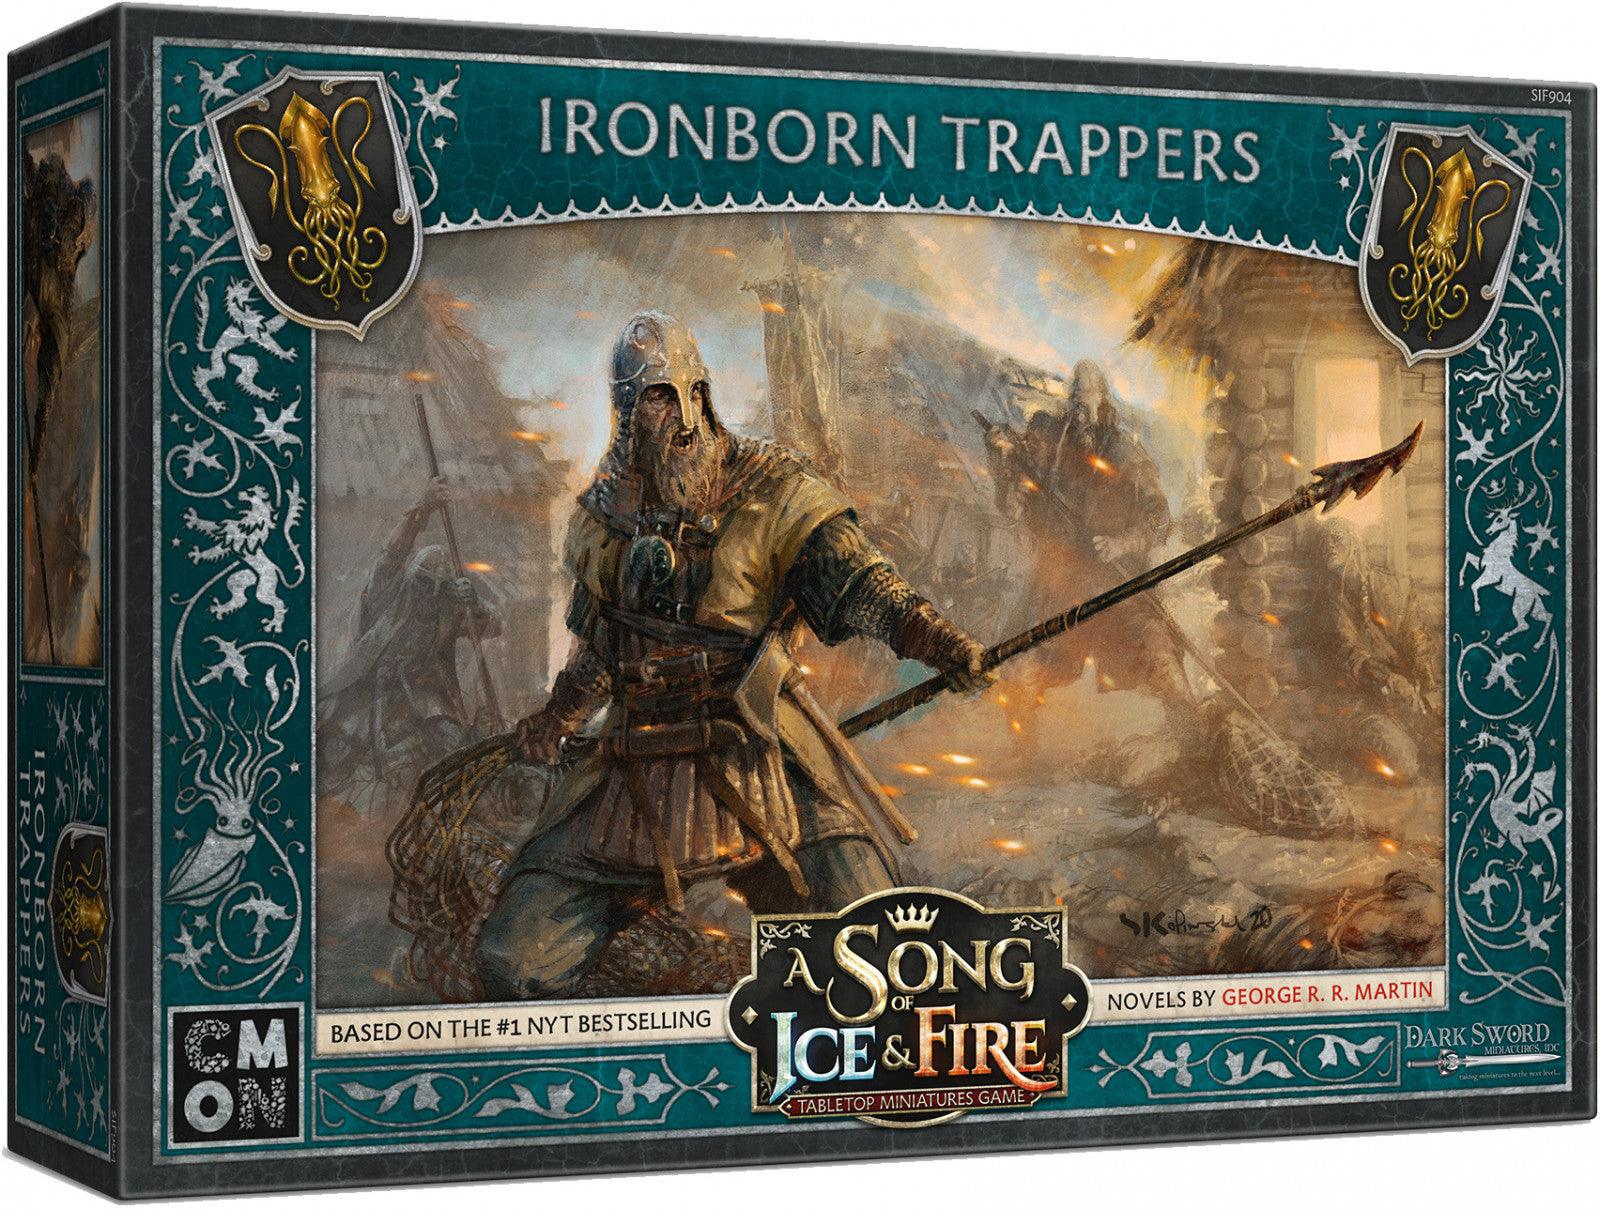 VR-91095 A Song of Ice and Fire TMG Ironborn Trappers - CMON - Titan Pop Culture